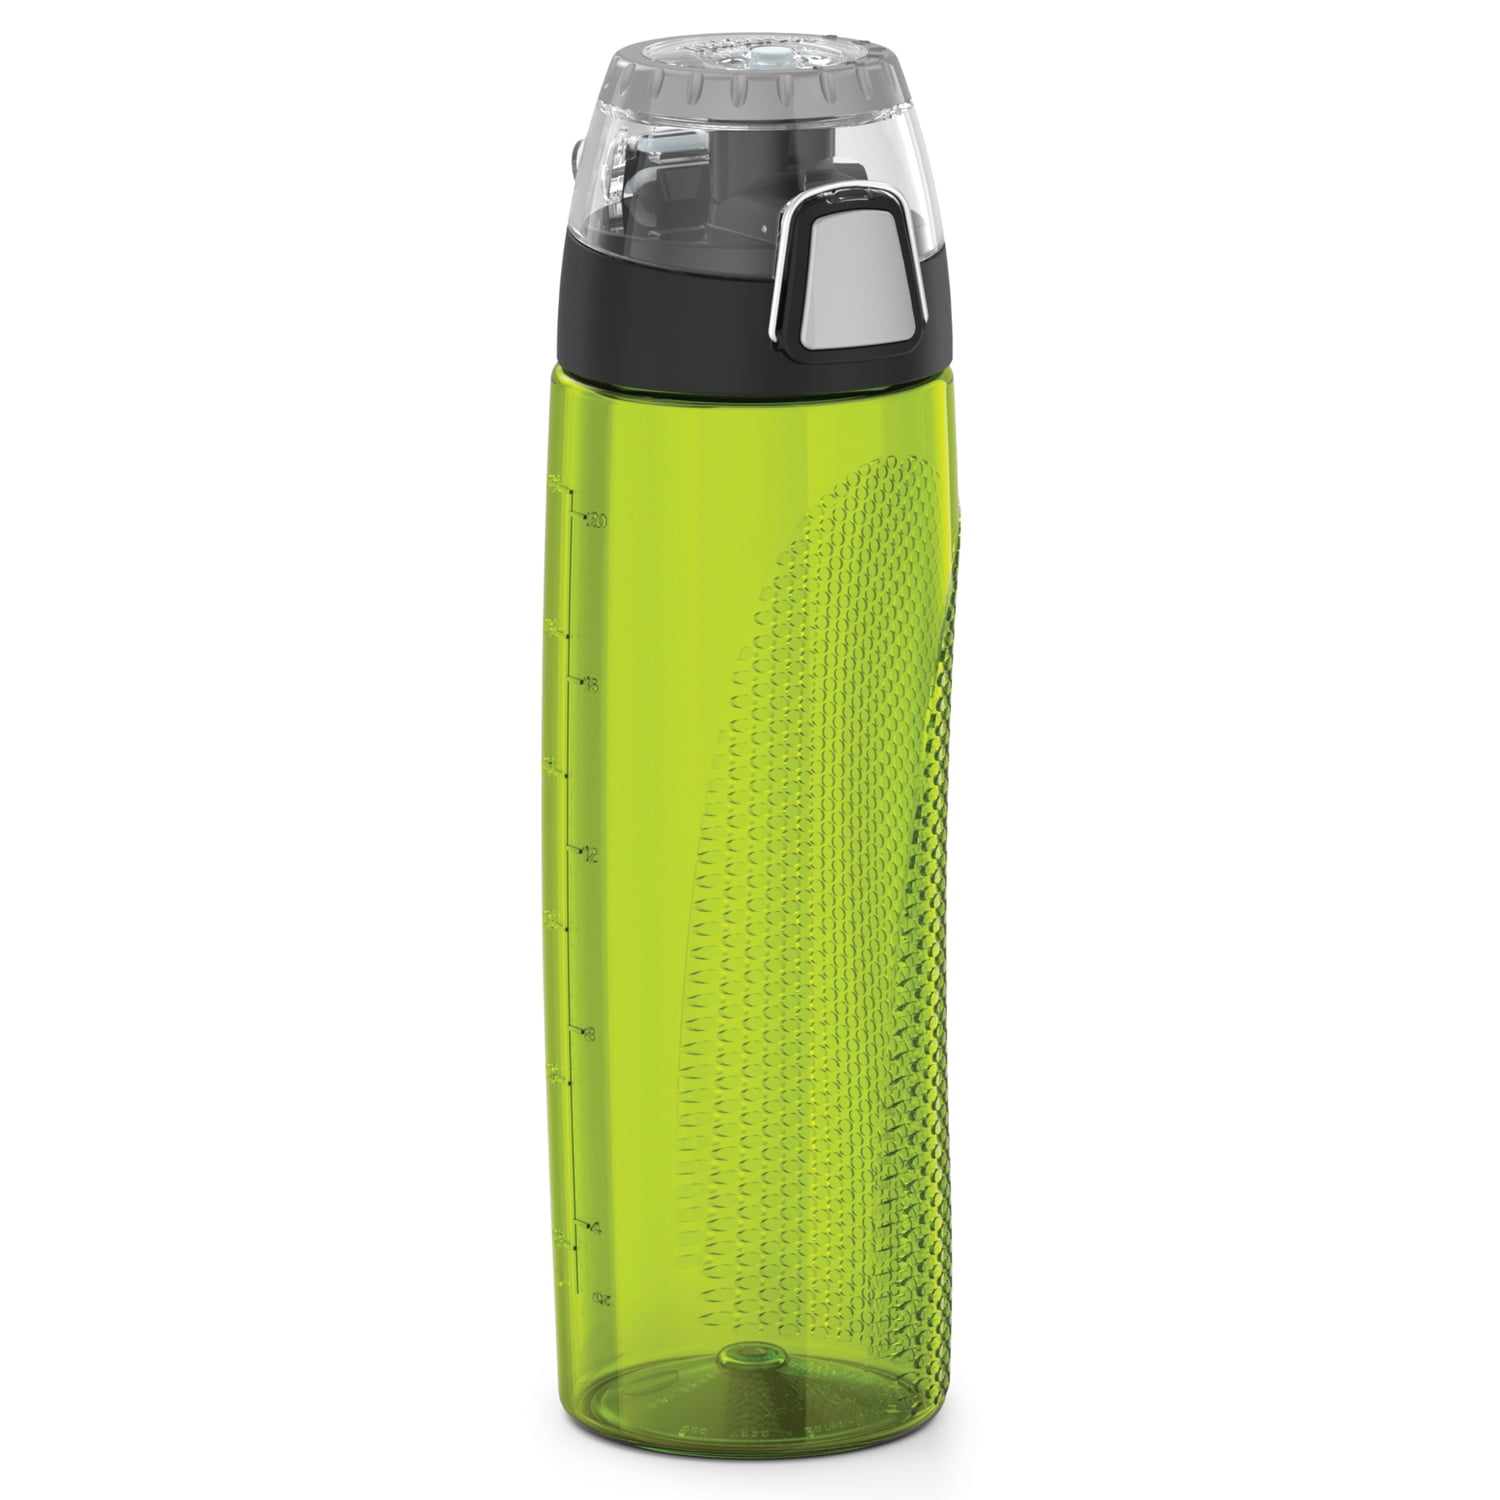 Promotional 24 oz Thermos® Hydration Bottle with Rotating Intake Meter  $13.17